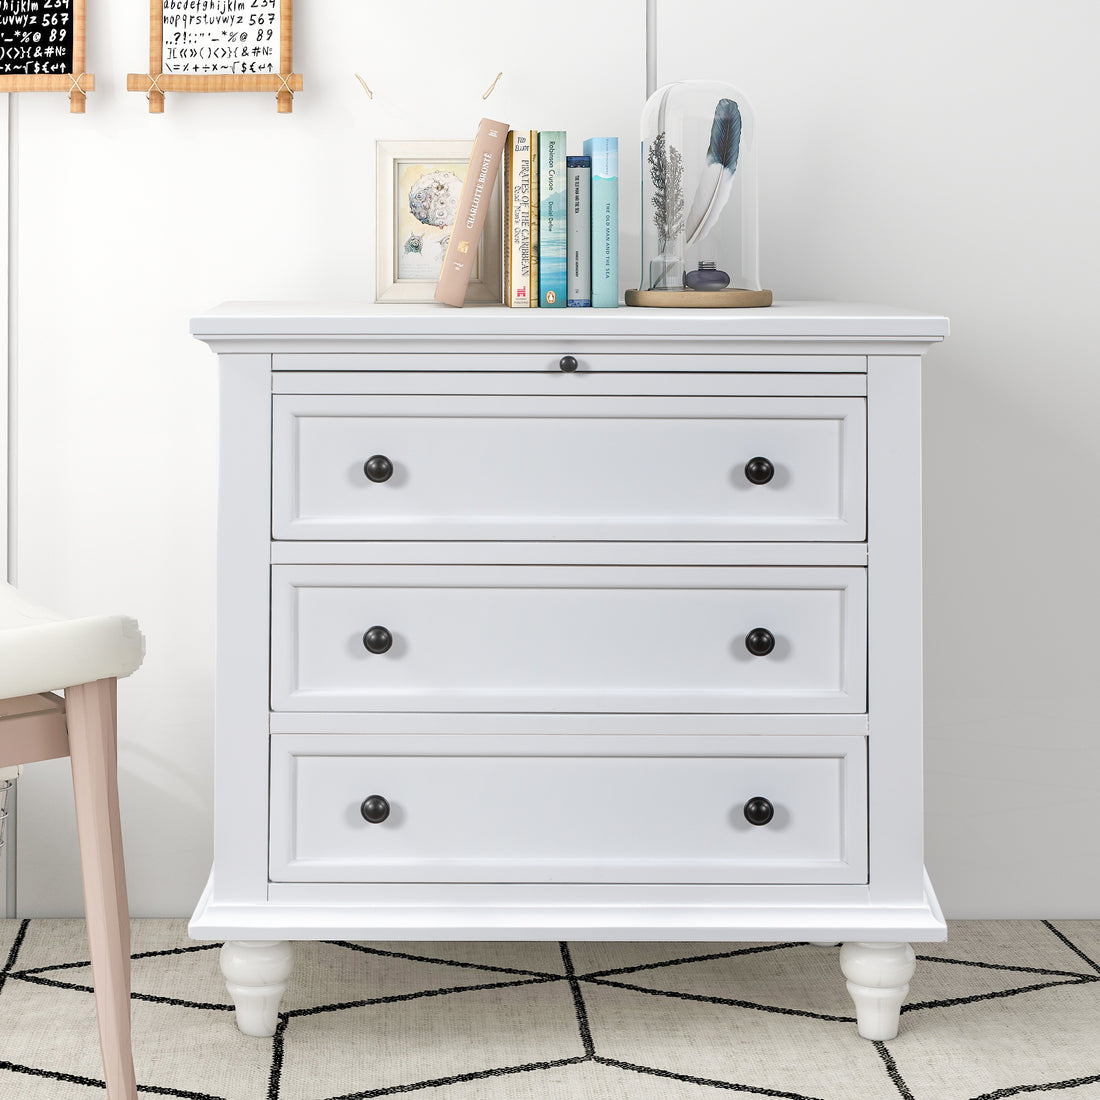 U STYLE 3 Drawer Storage Wood Cabinet, End Table with white-pine